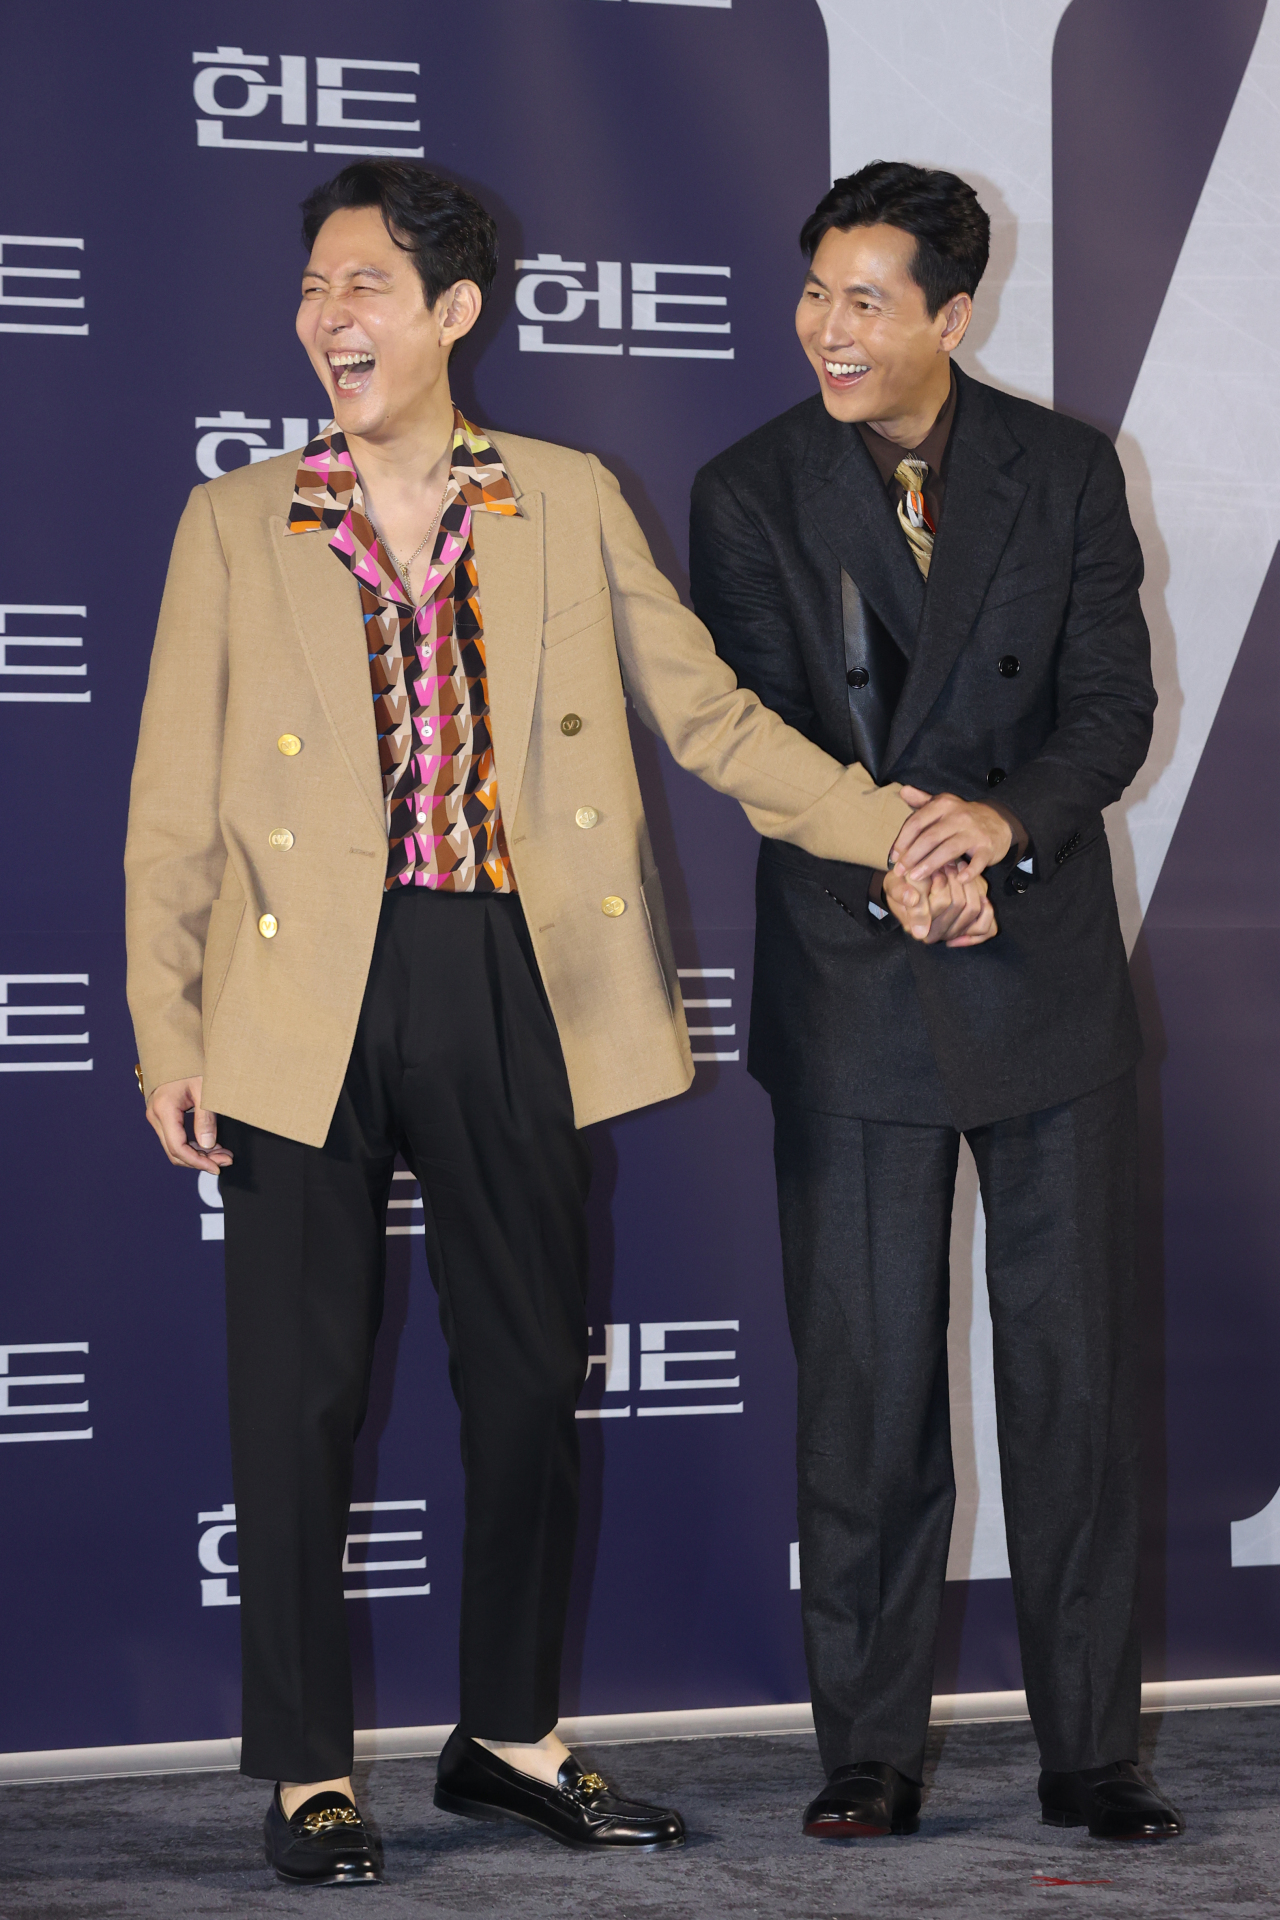 Lee Jung-jae (left) and Jung Woo-sung hold hands during a photo session after a press conference introducing “Hunt” at Megabox Seongsu in Seoul, Tuesday. (Yonhap)